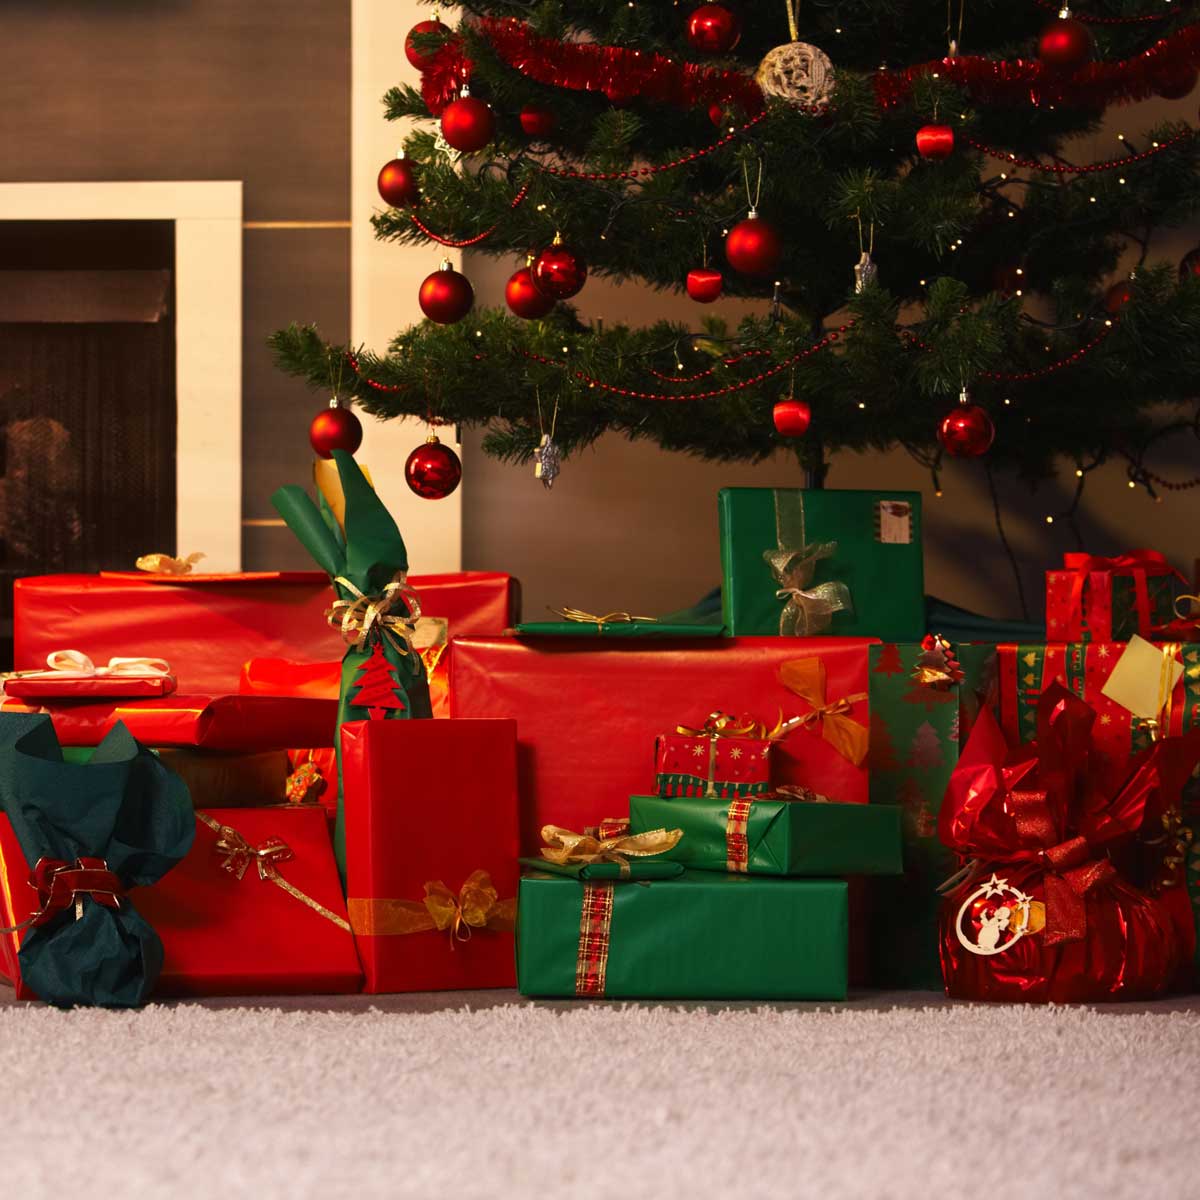 red and green wrapped presents under Christmas tree